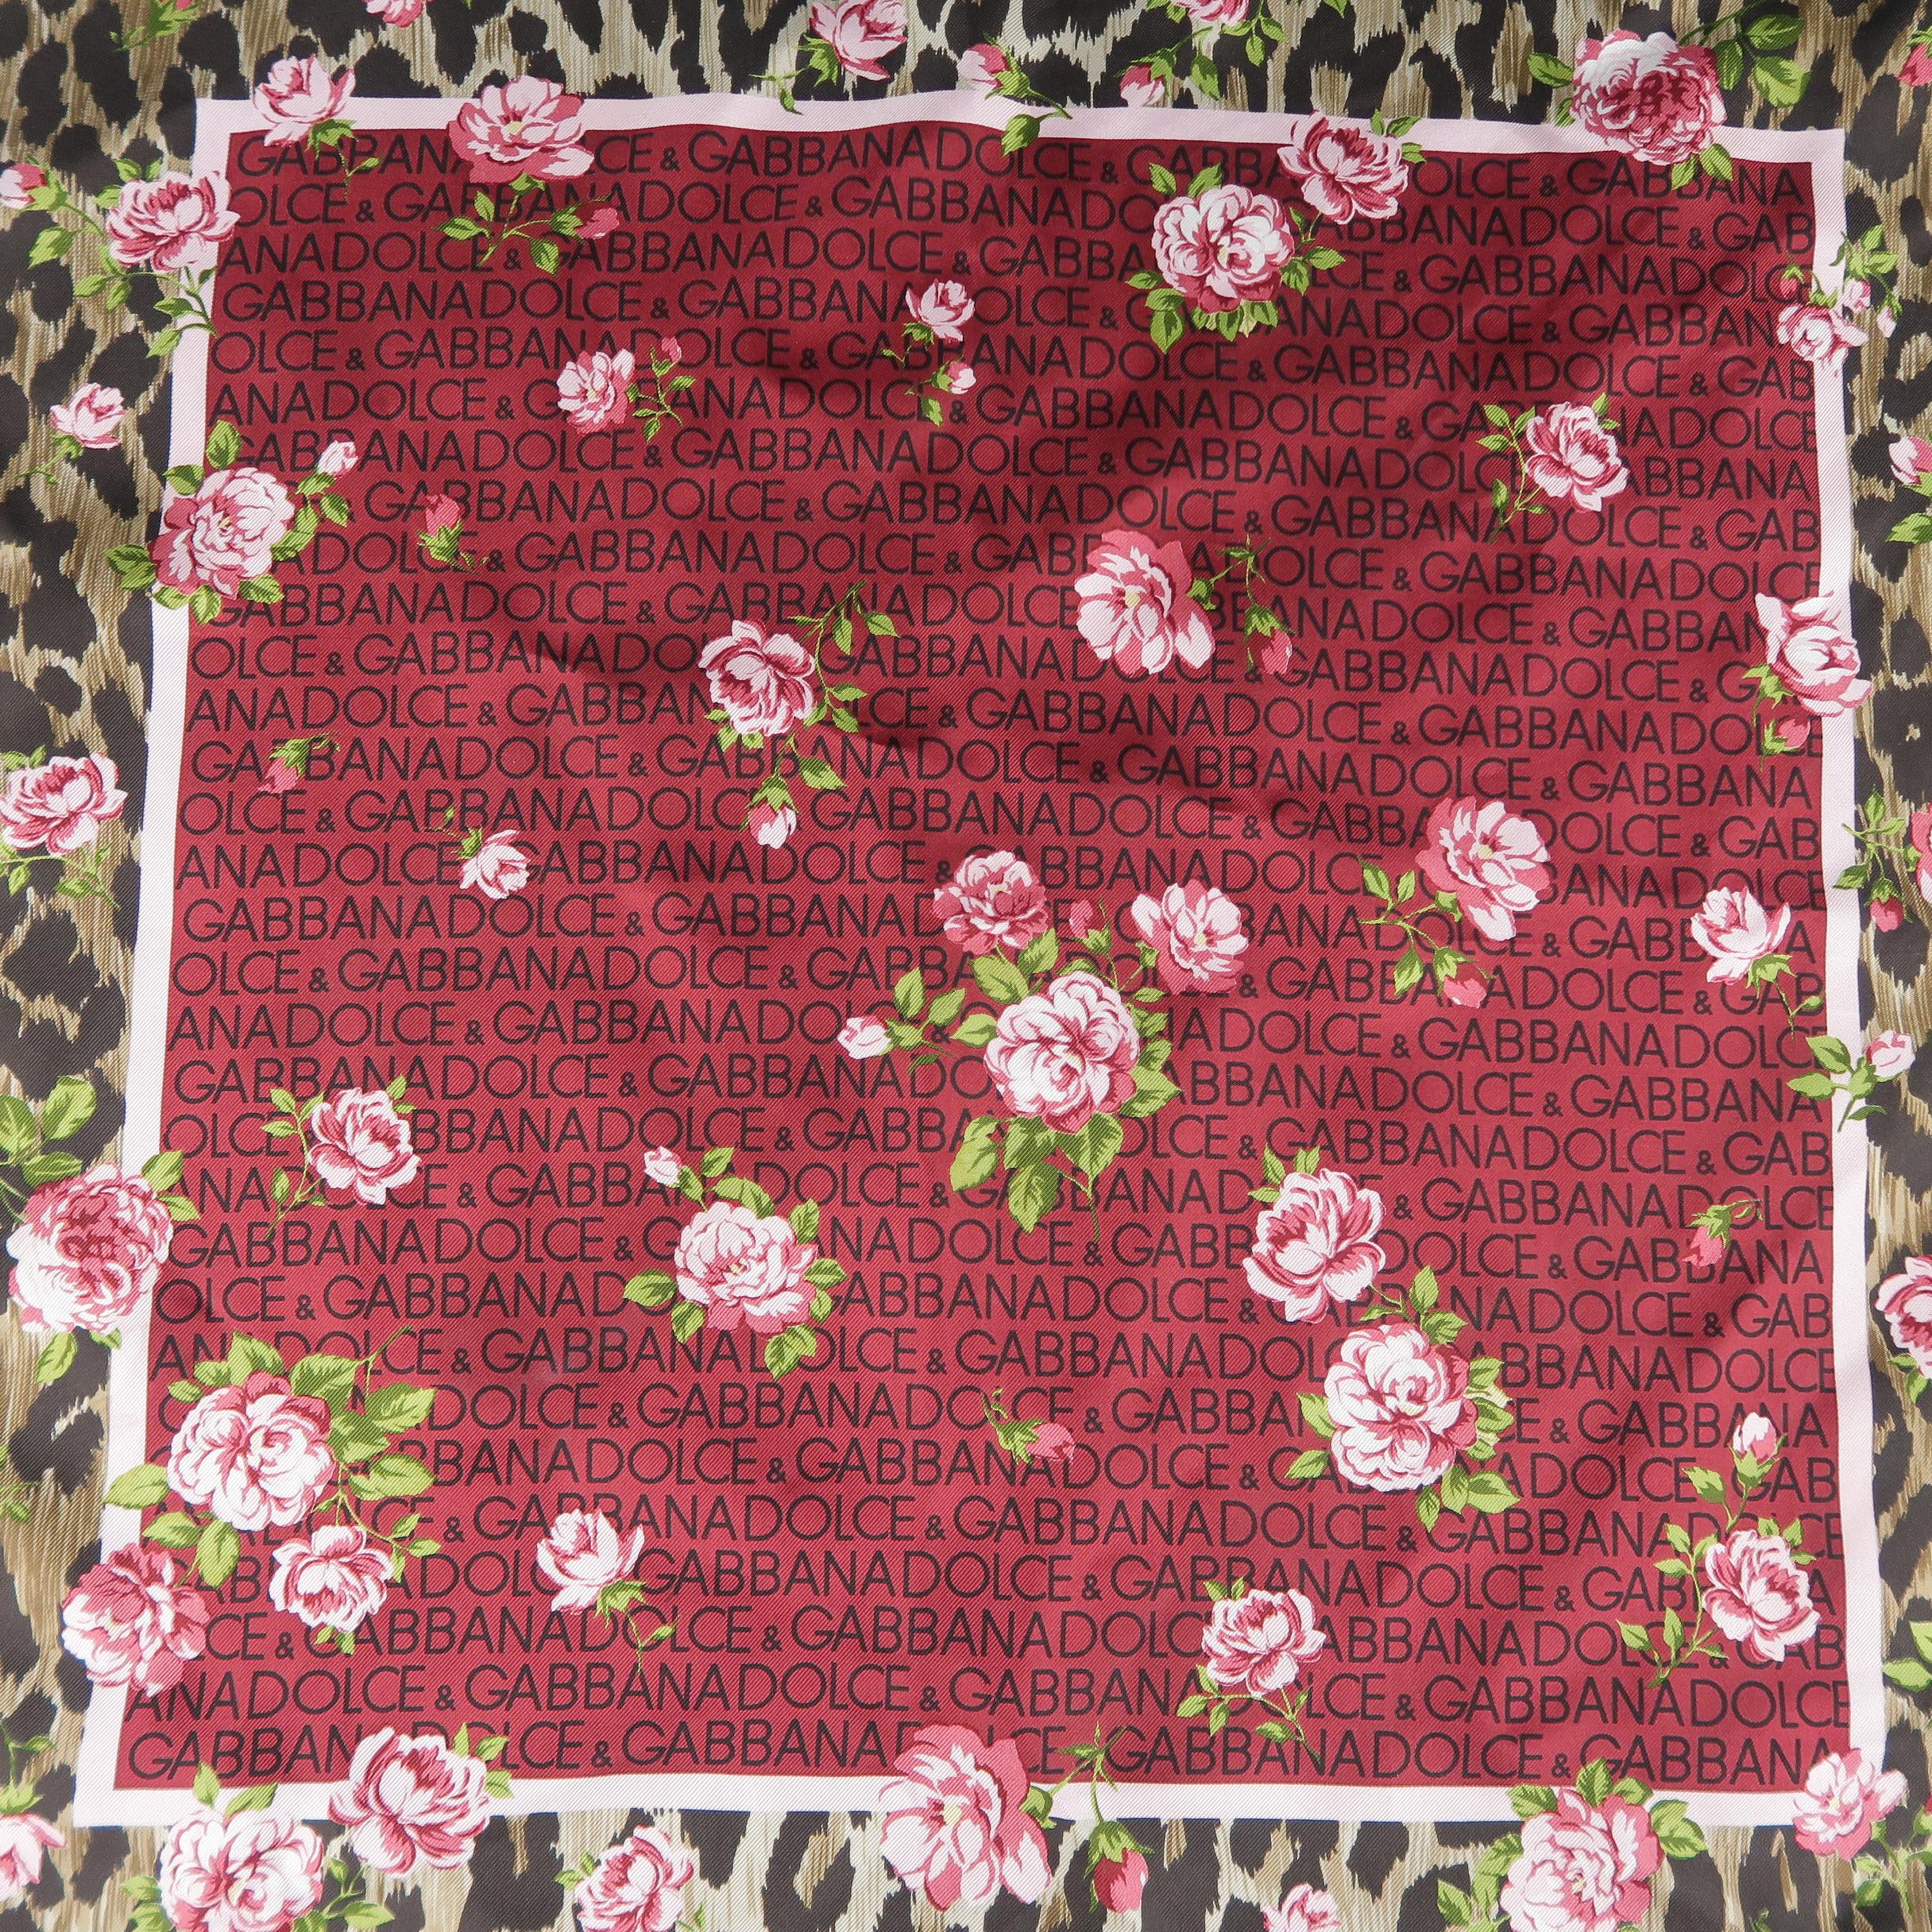 DOLCE & GABBANA scarf comes in silk twill with a burgundy logo print with leopard print boarder and floral overlay. Made in Italy.
 
New with Tags.
 
18.5 x 19 in.
 
SKU: 92948